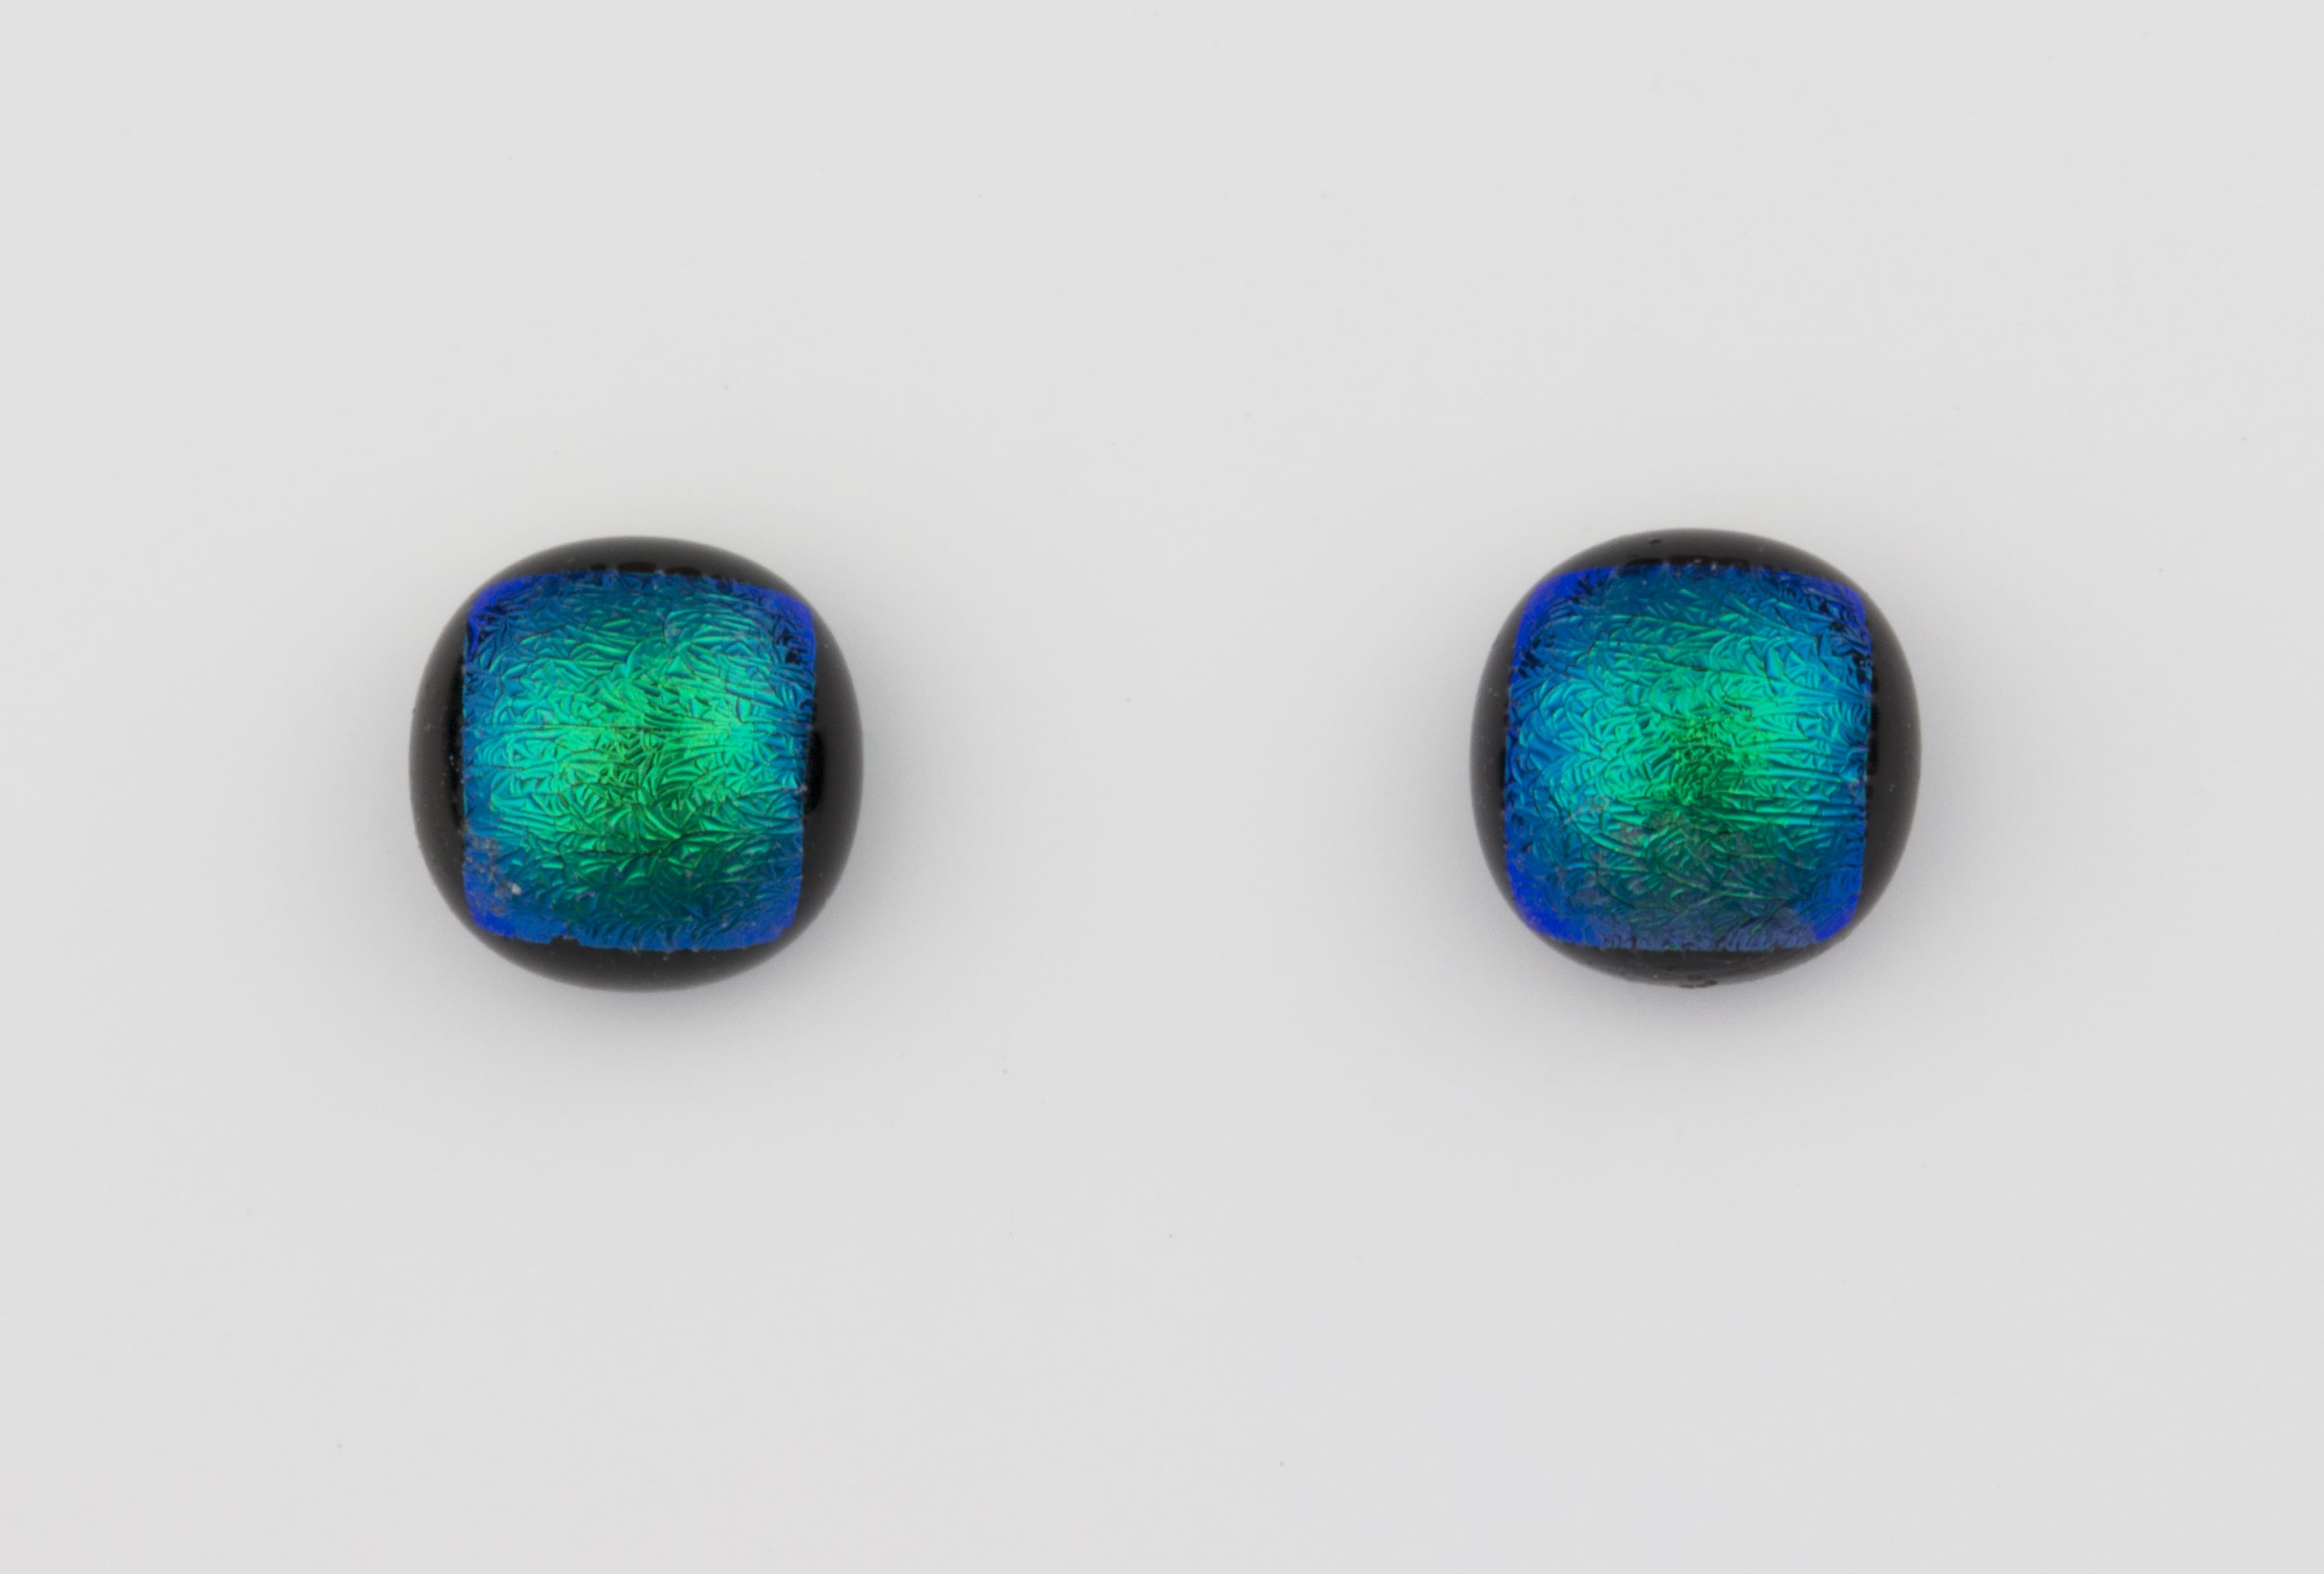 Dichroic glass jewellery uk, handmade stud earrings with green dichroic glass, round, sterling glass 7-9mm, silver posts.